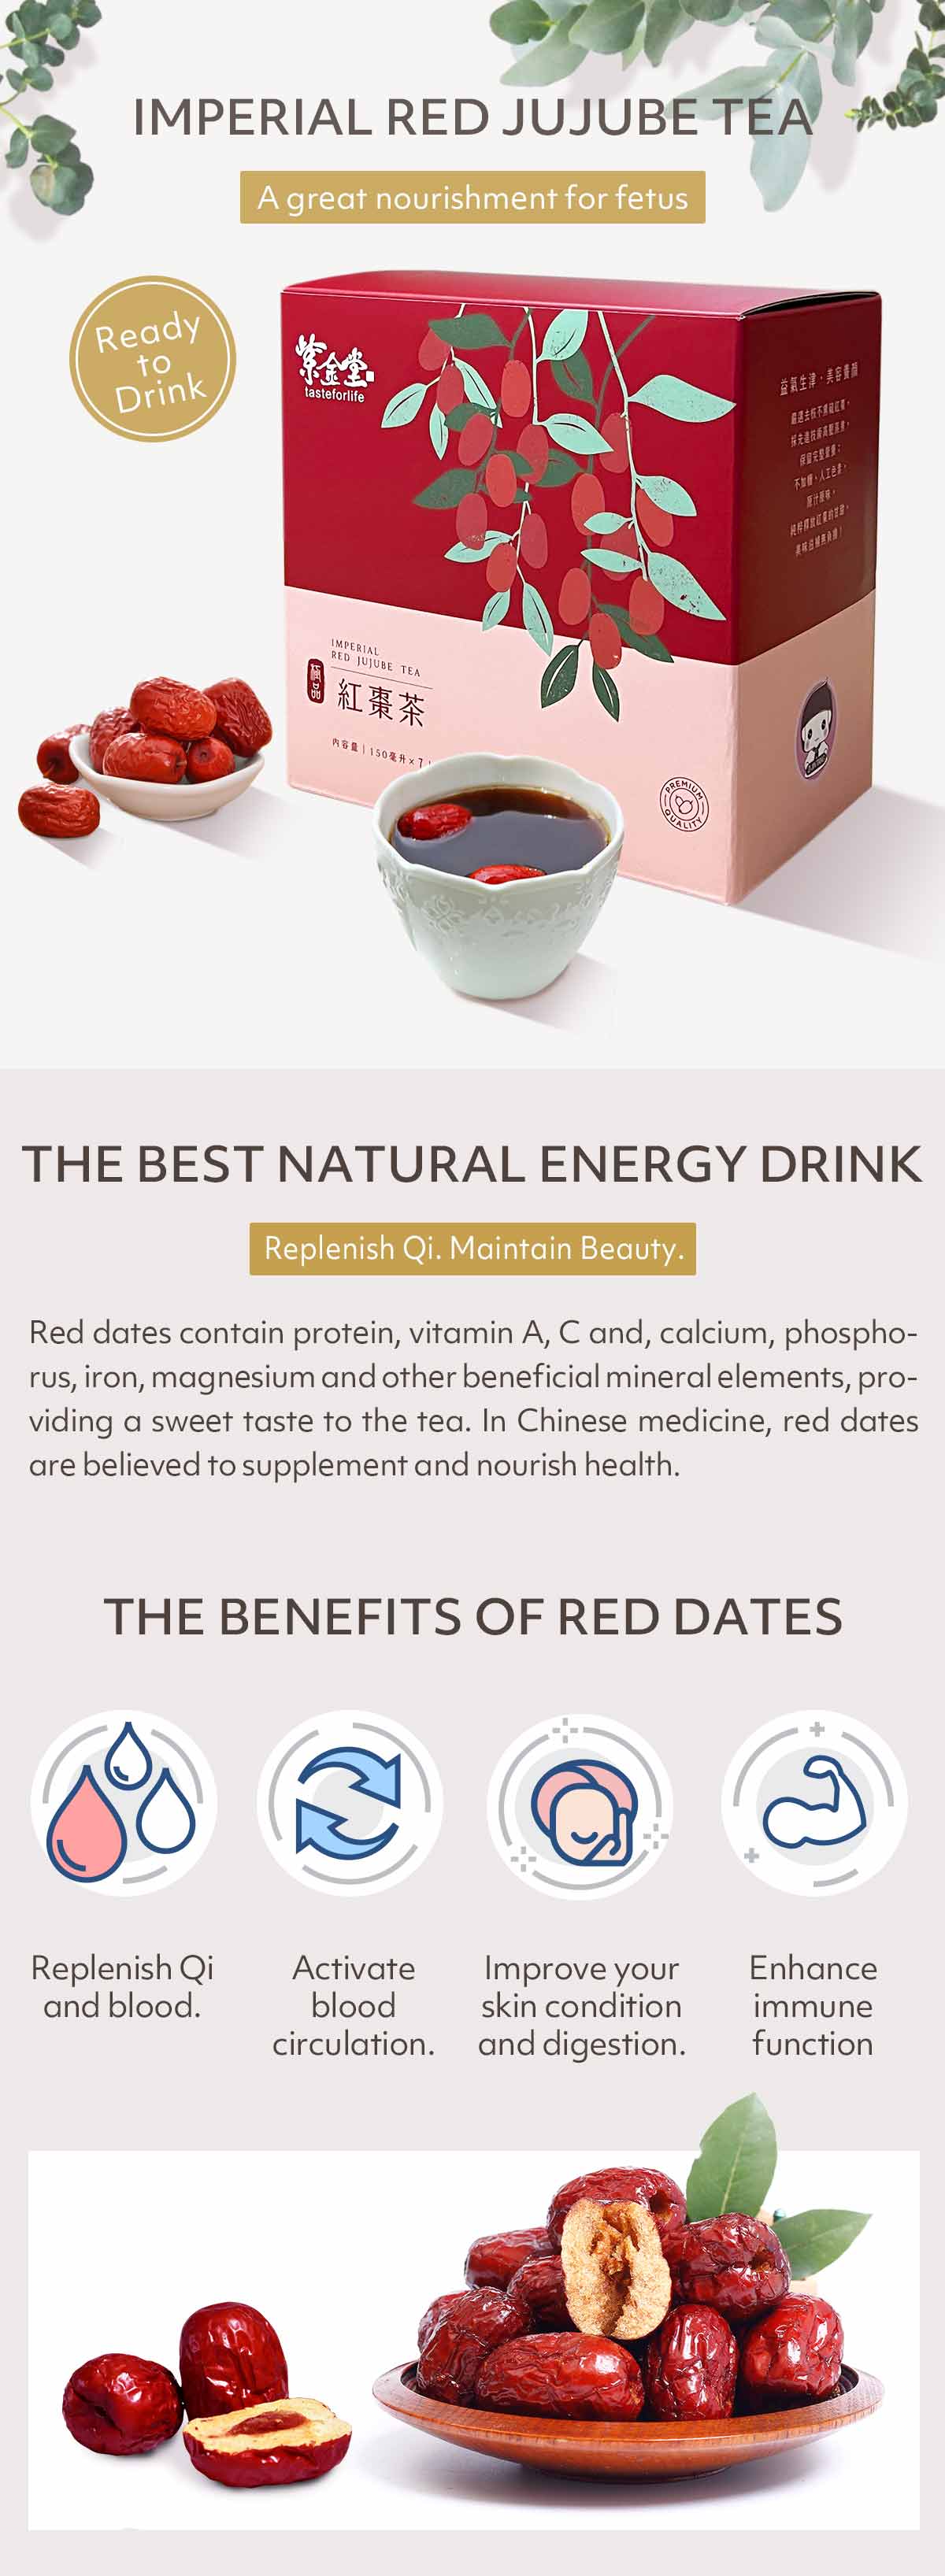 Imperial Red Jujube Tea-A great nourishment for fetus